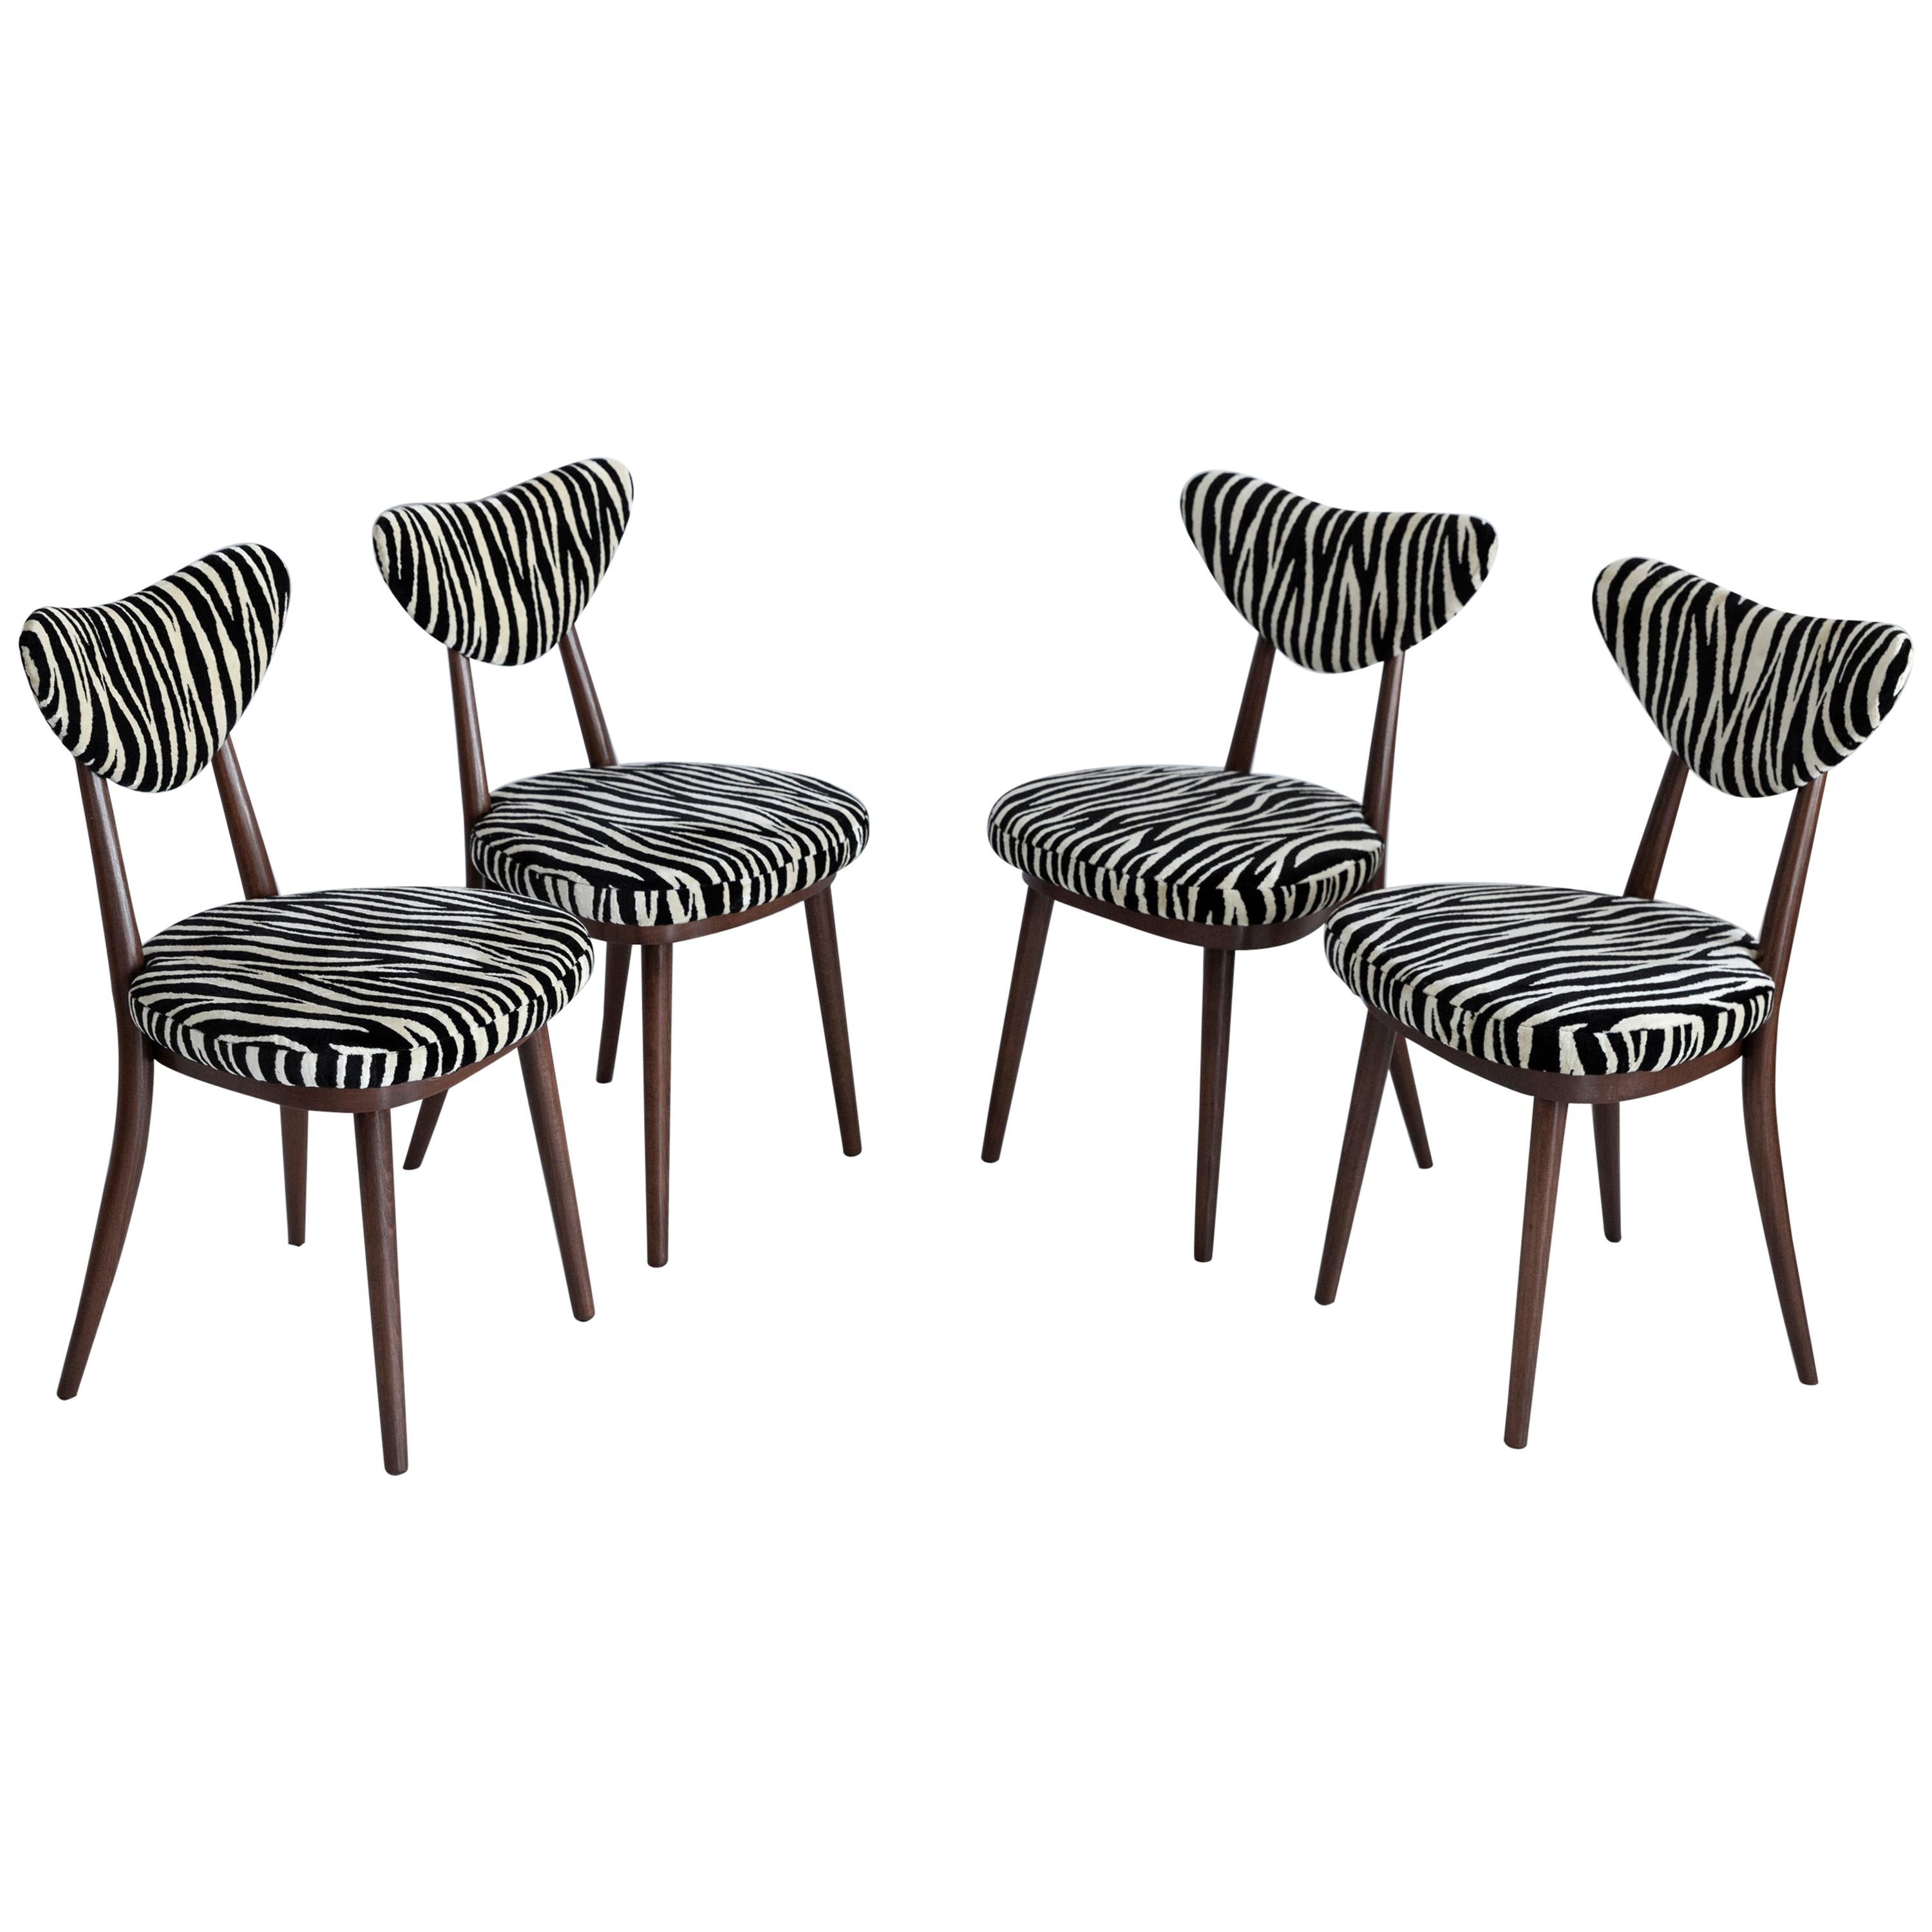 Set of Four Midcentury Zebra Black and White Heart Chairs, Poland, 1960s For Sale